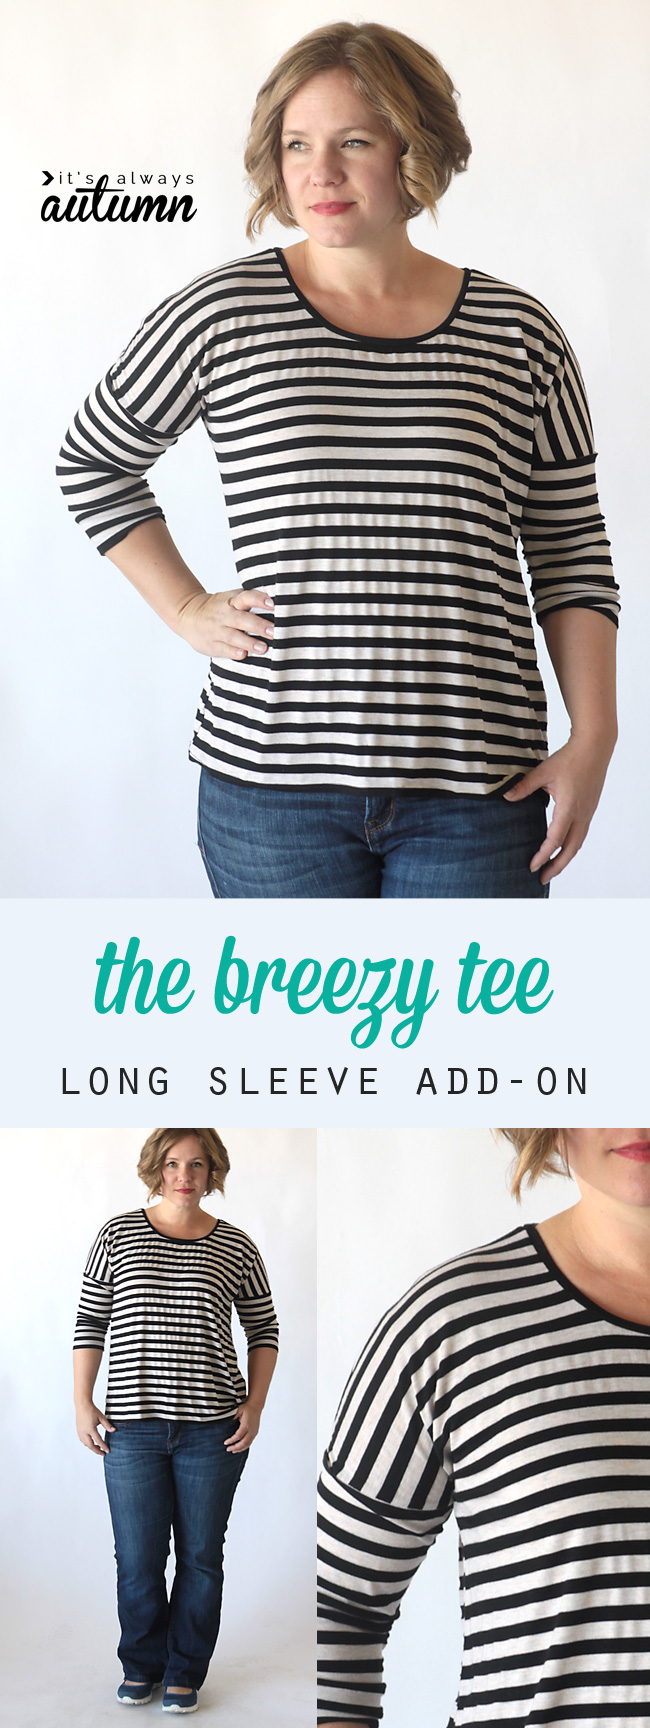 A woman wearing the breezy tee with long sleeves